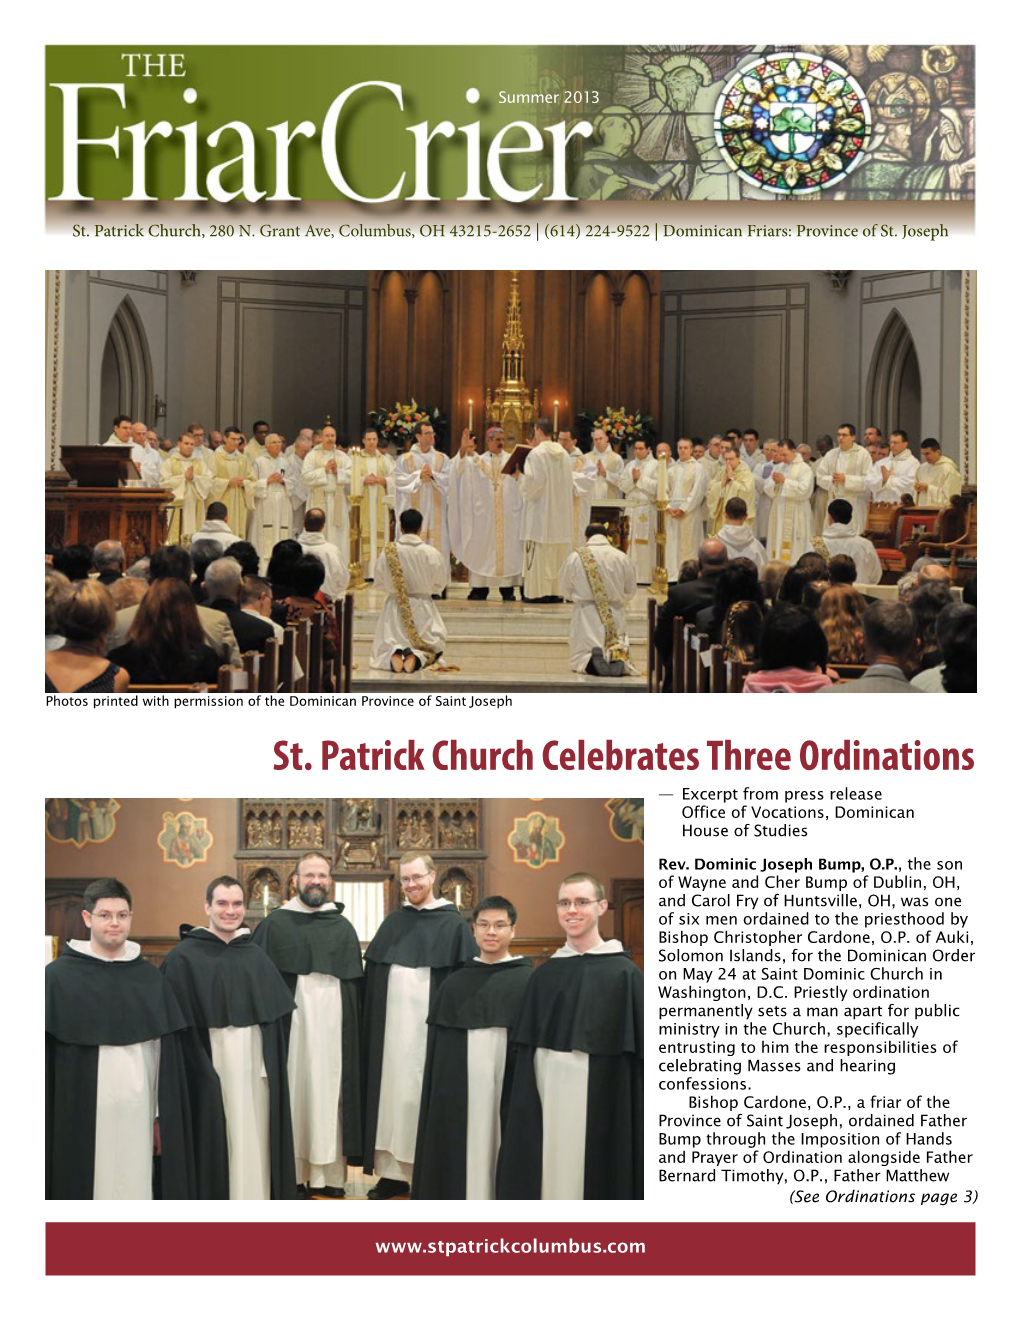 St. Patrick Church Celebrates Three Ordinations — Excerpt from Press Release Office of Vocations, Dominican House of Studies